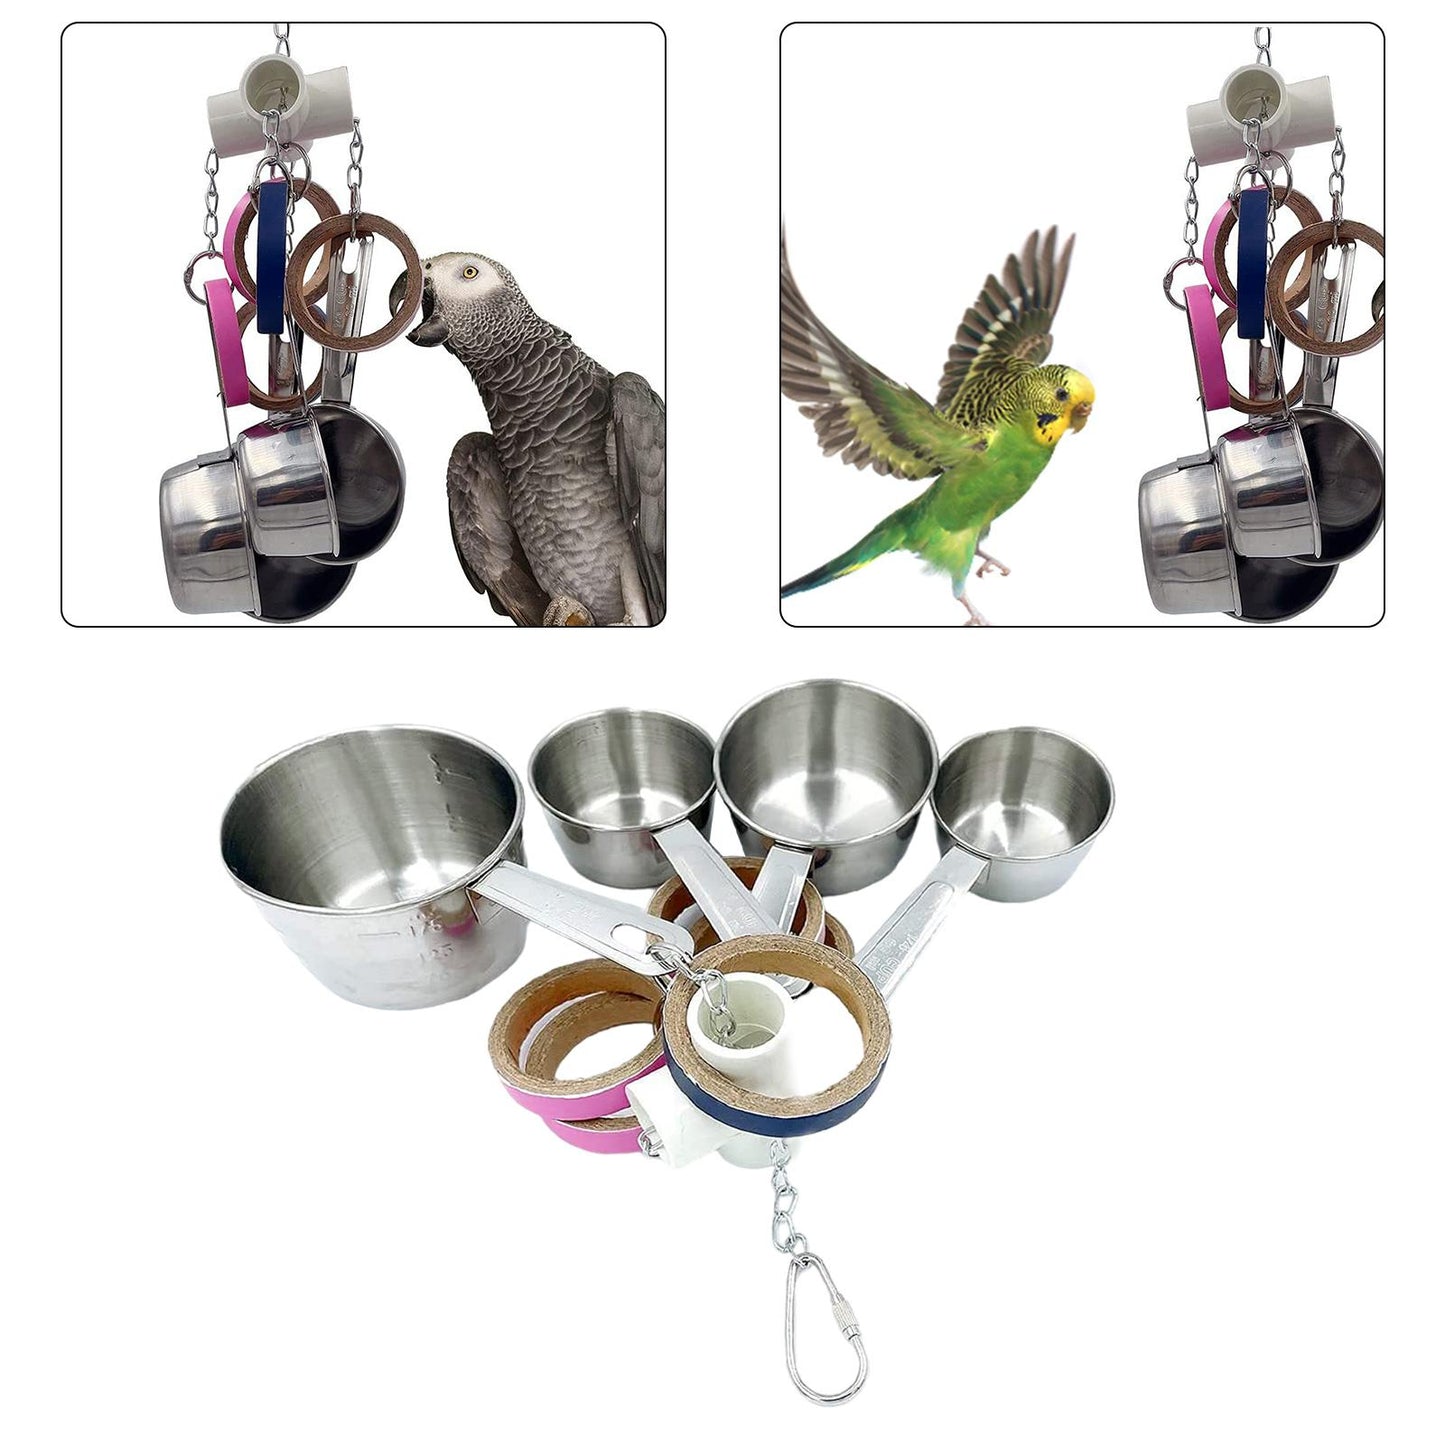 4 Pots and Bagel Stainless Steel Cups Parrot Toys